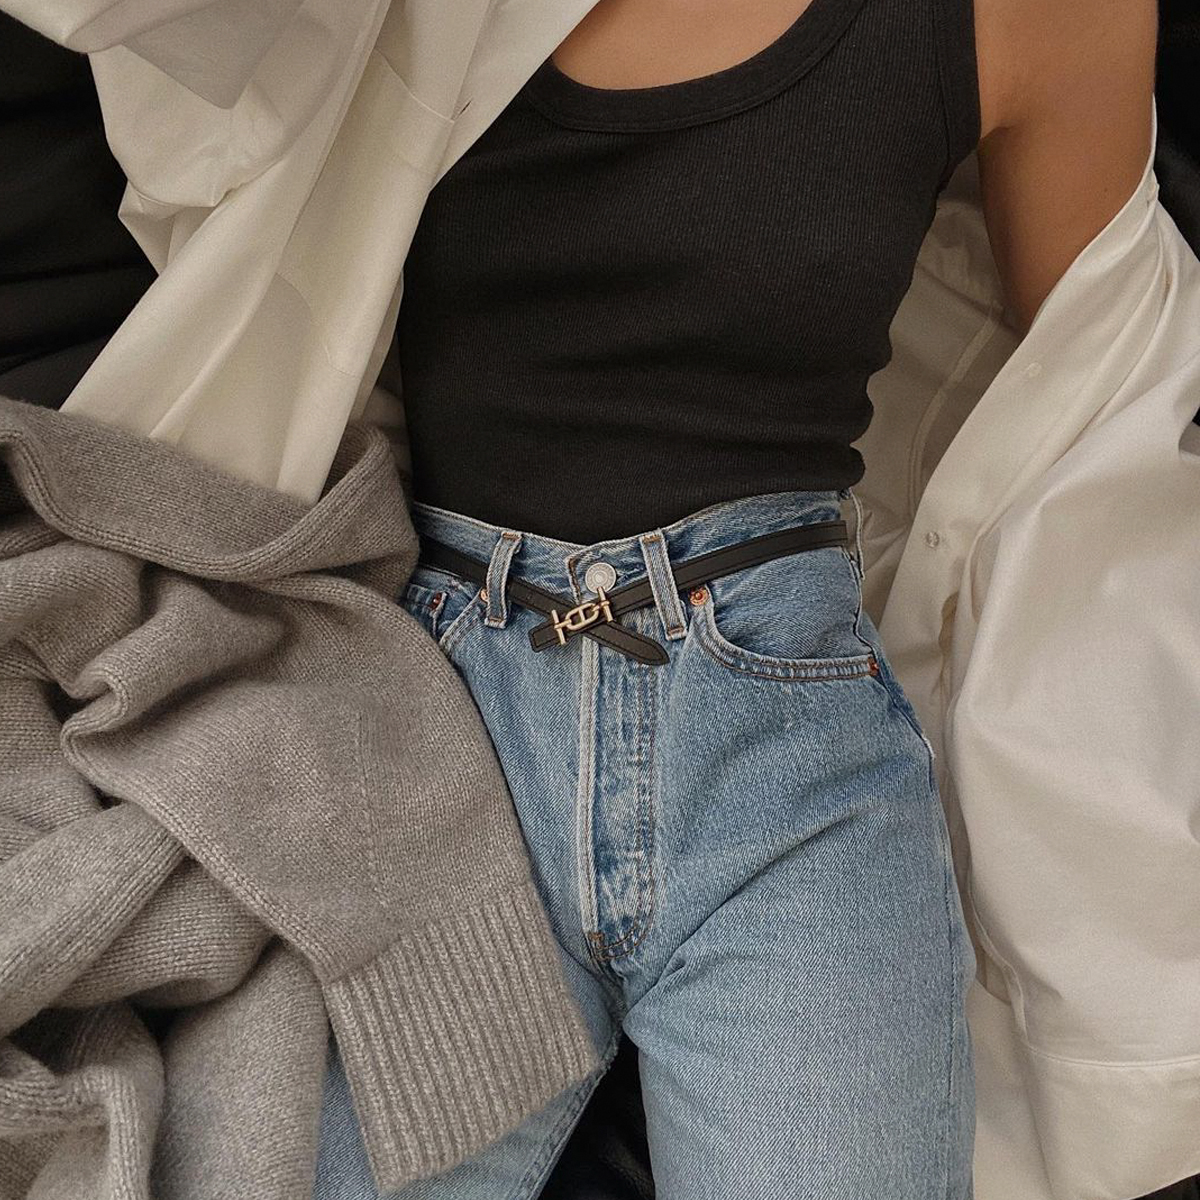 Jeans Trends 2023: 9 Totally Fresh Styles to Bookmark